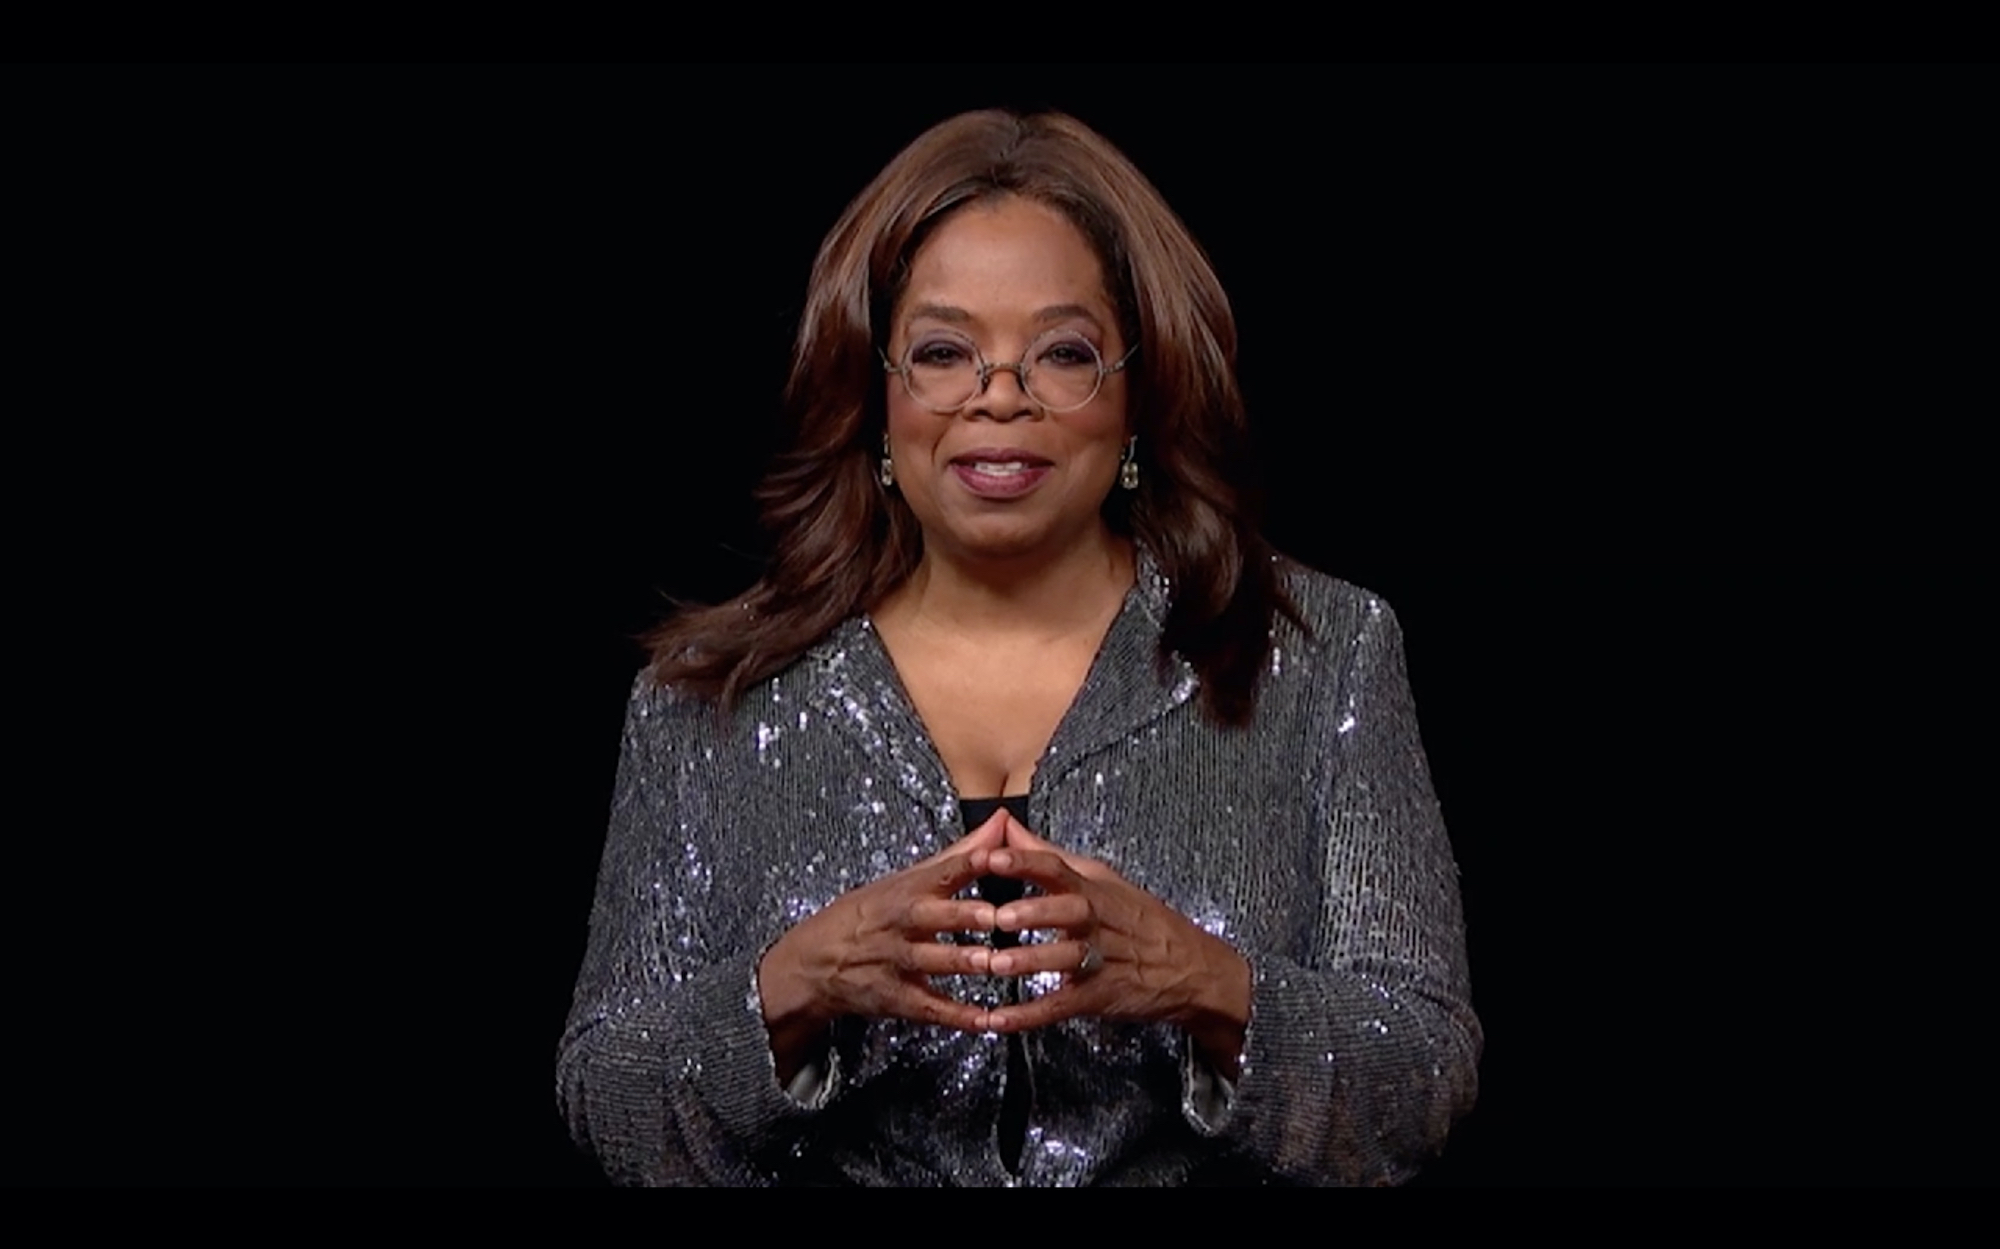 Oprah Didn’t Want to Have Babies But That Didn’t Stop Her From Being Maternal: ‘I Feel Like I Am a Mother to the World’s Children’